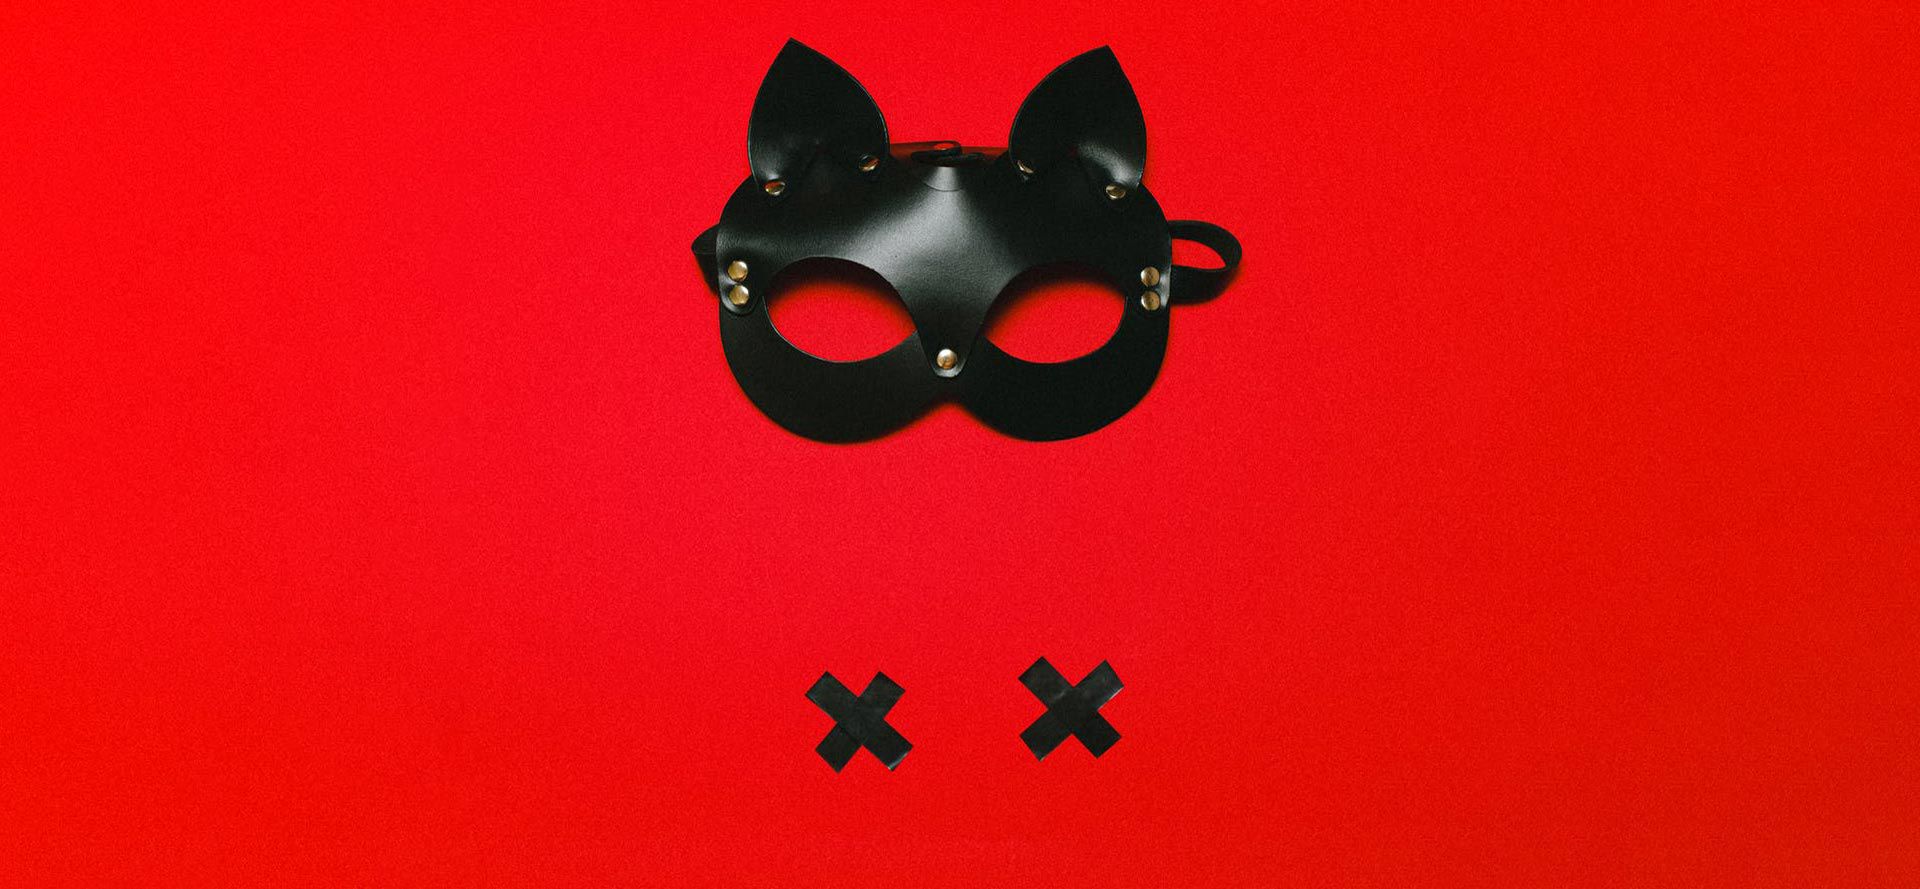 BDSM mask on a red background. Date.